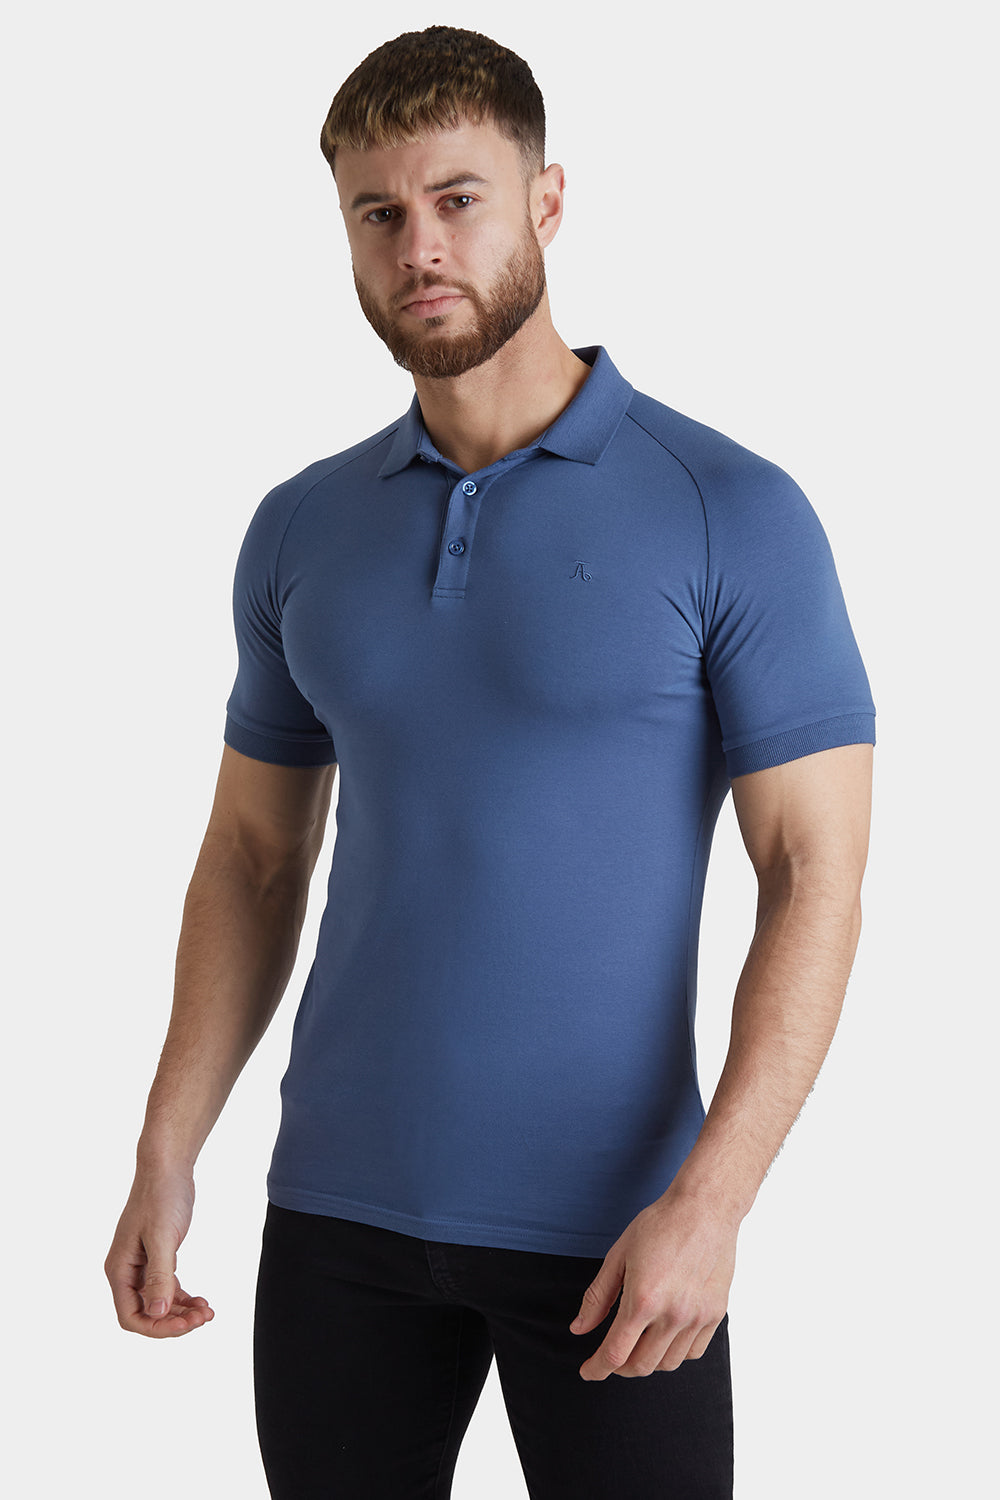 Athletic Fit Polo Shirts - Tailored Athlete - TAILORED ATHLETE - USA